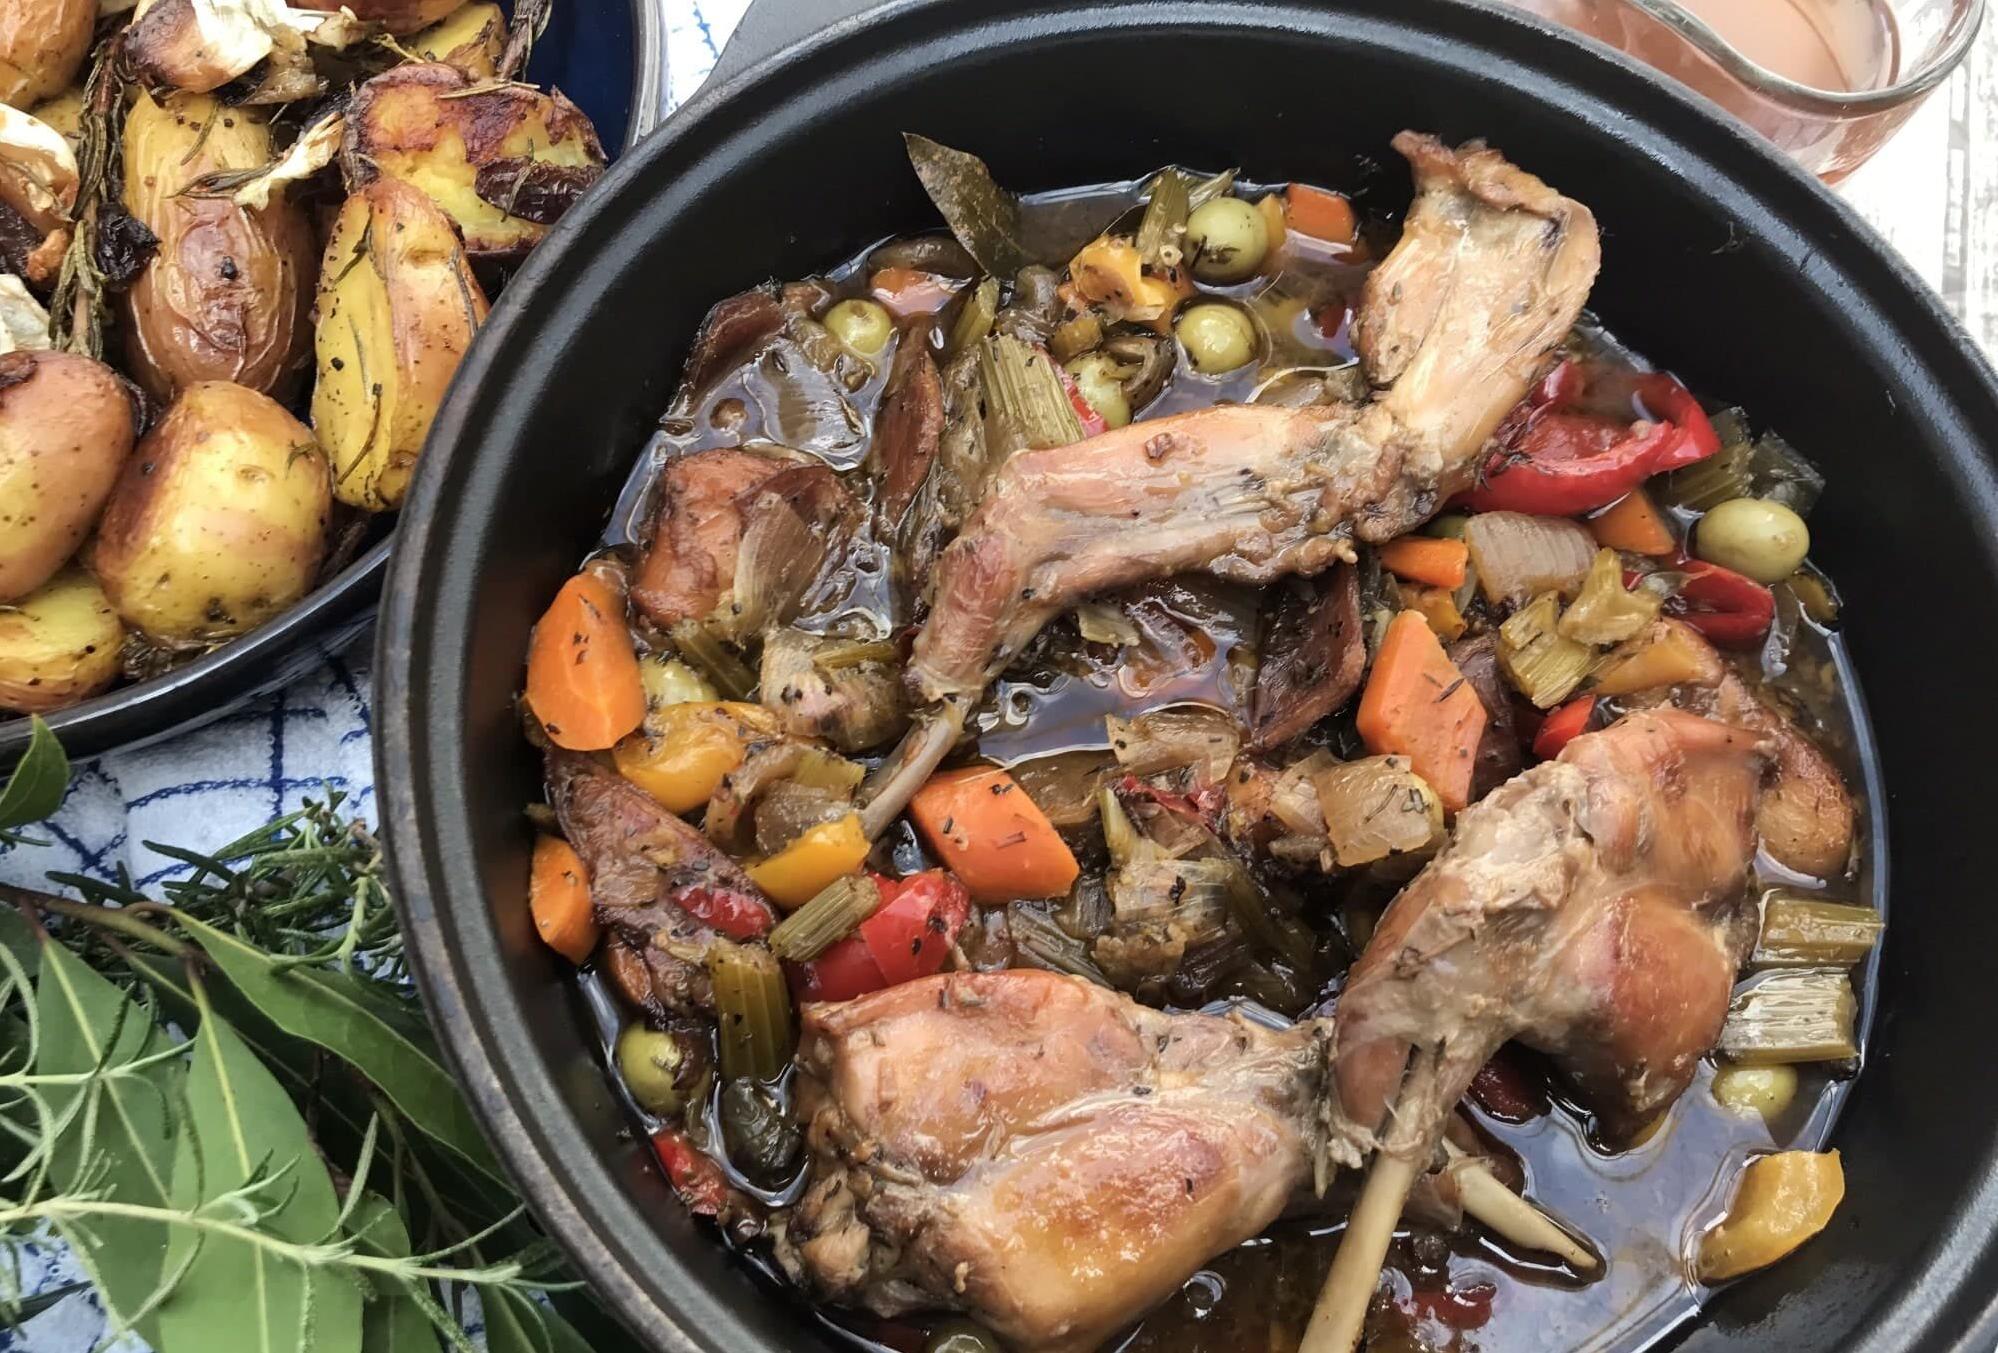  Savory rabbit stew with carrots and onions